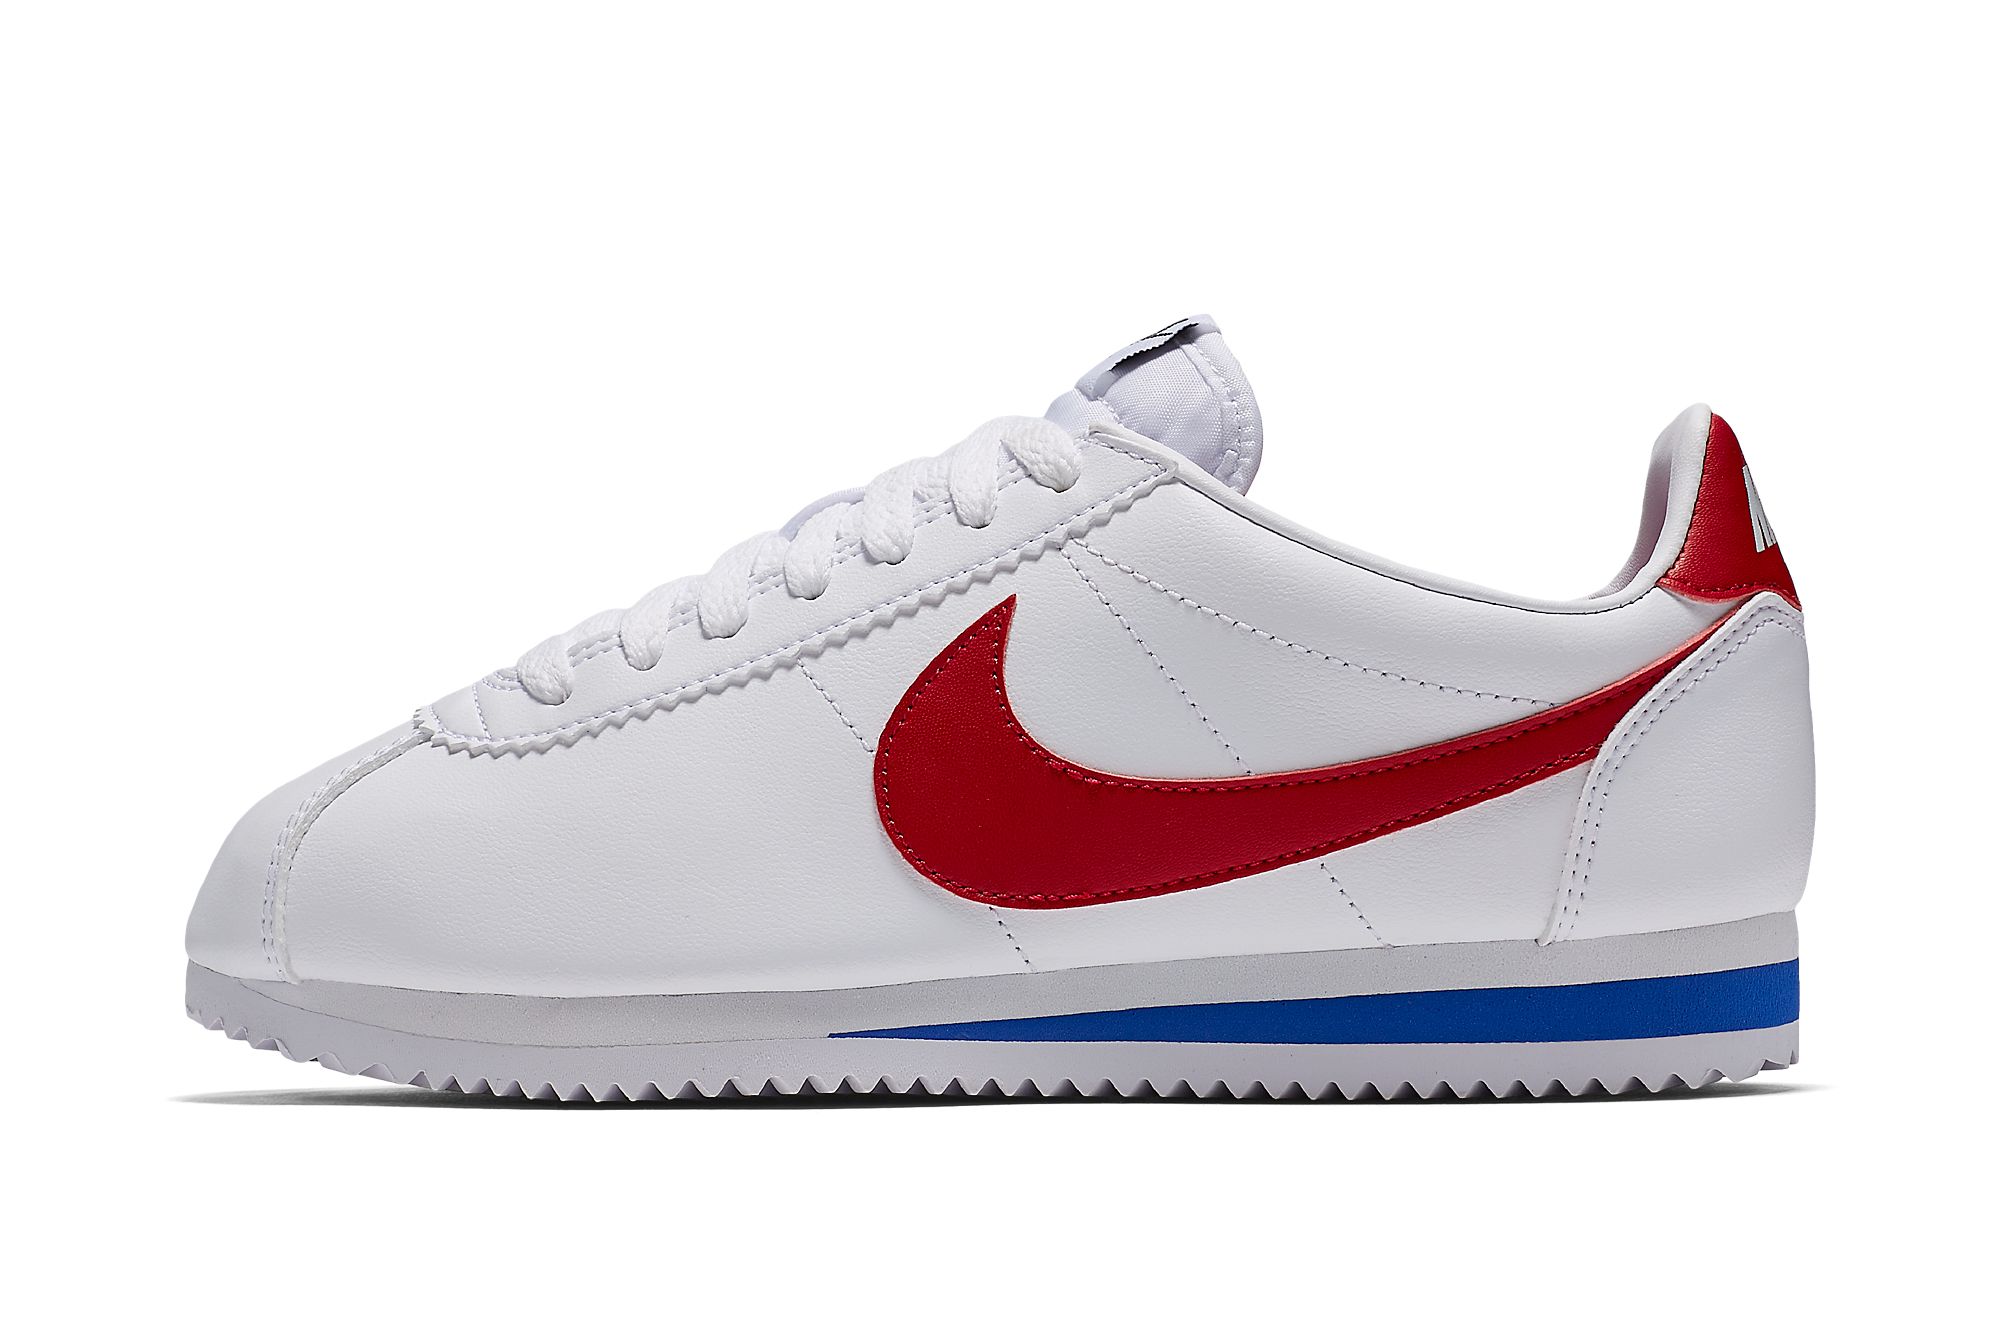 Dakloos Vriend afgunst Nike Bring Back The Classic Cortez Women's In Signature Red, White and Blue  - Sneaker Freaker